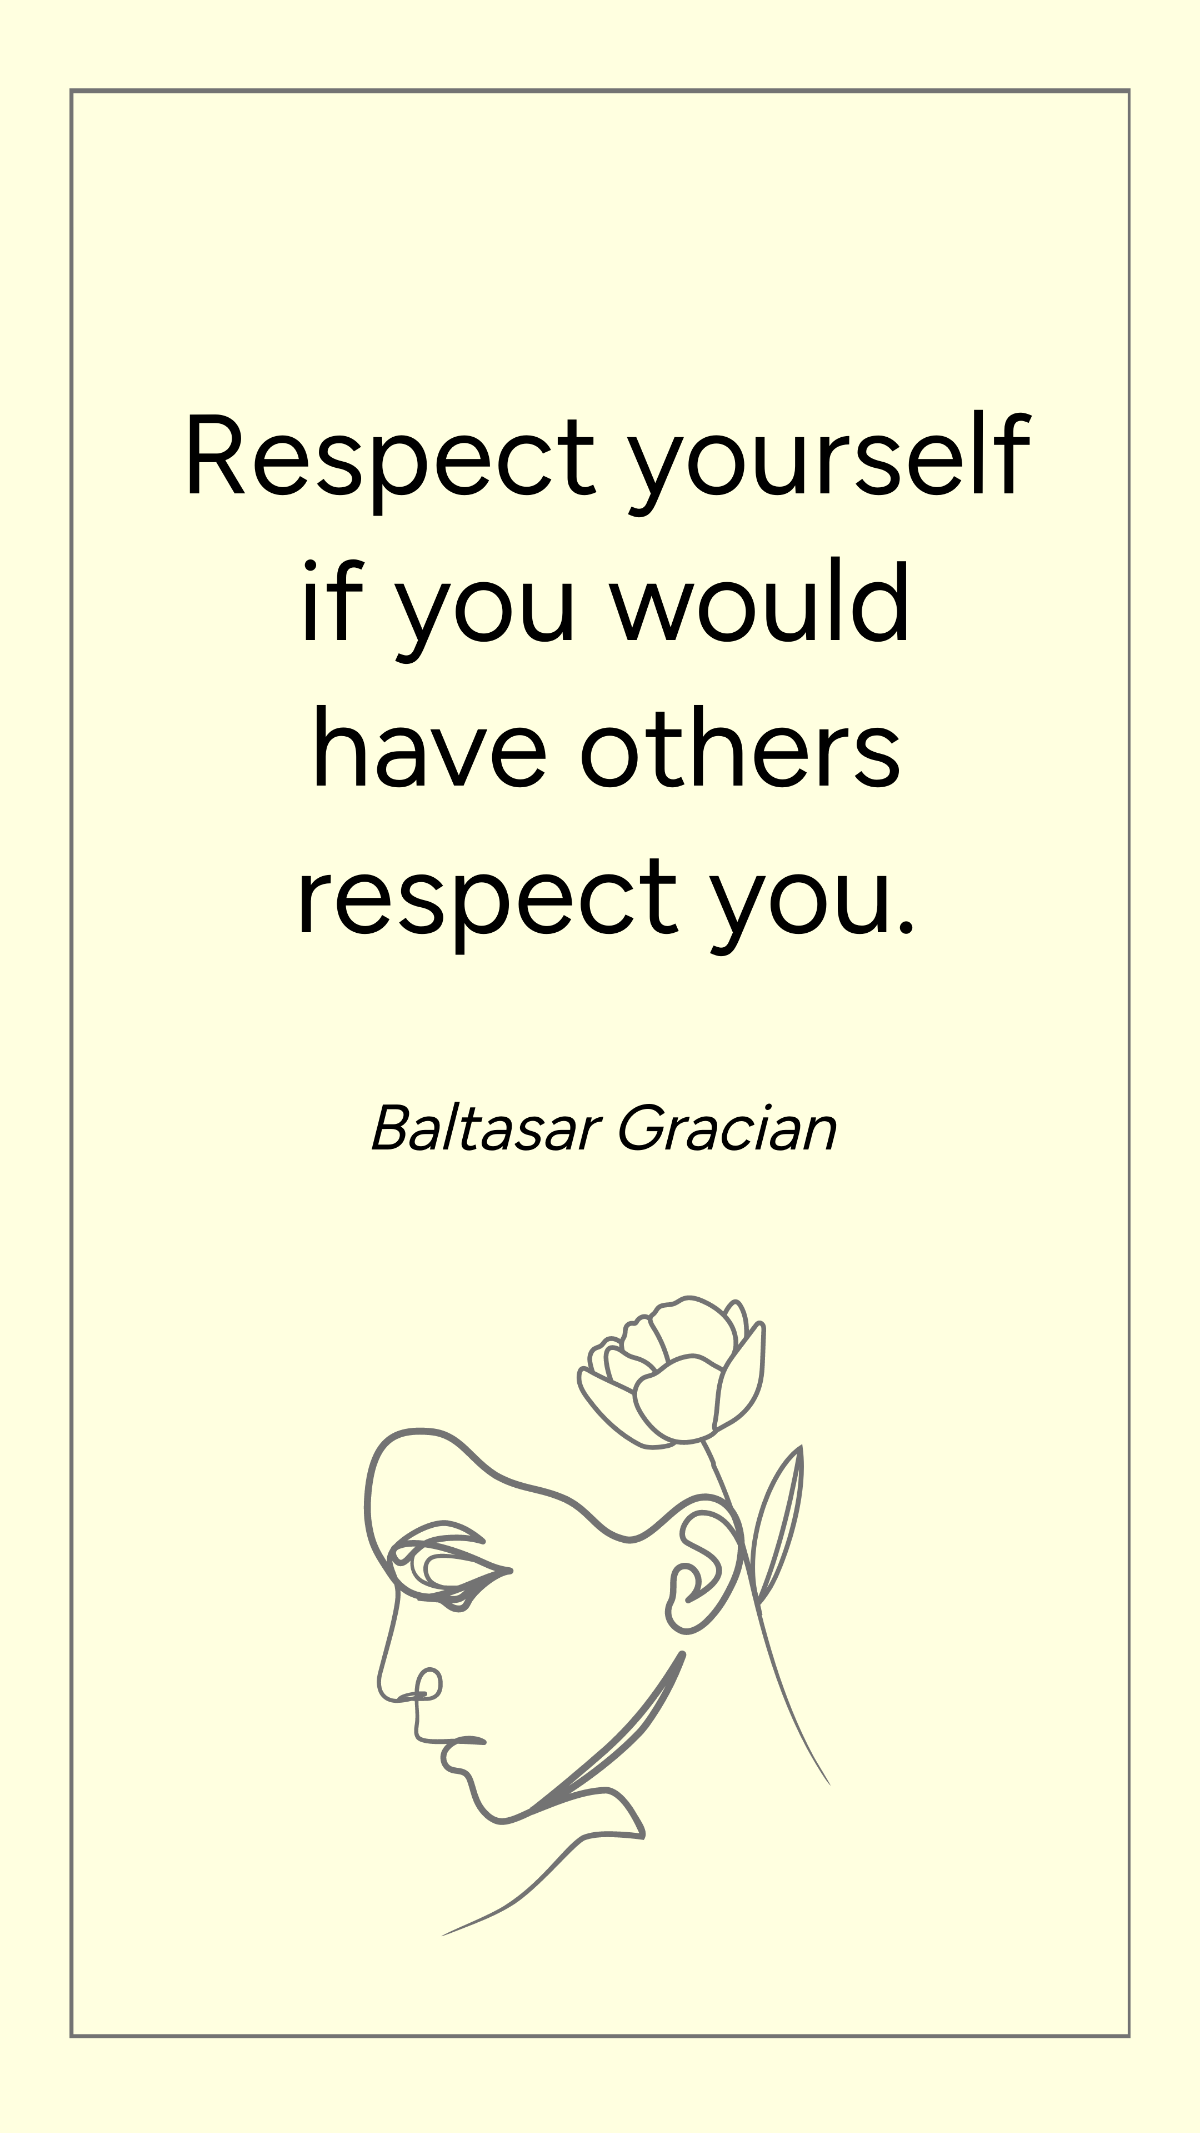 Baltasar Gracian - Respect yourself if you would have others respect you. Template